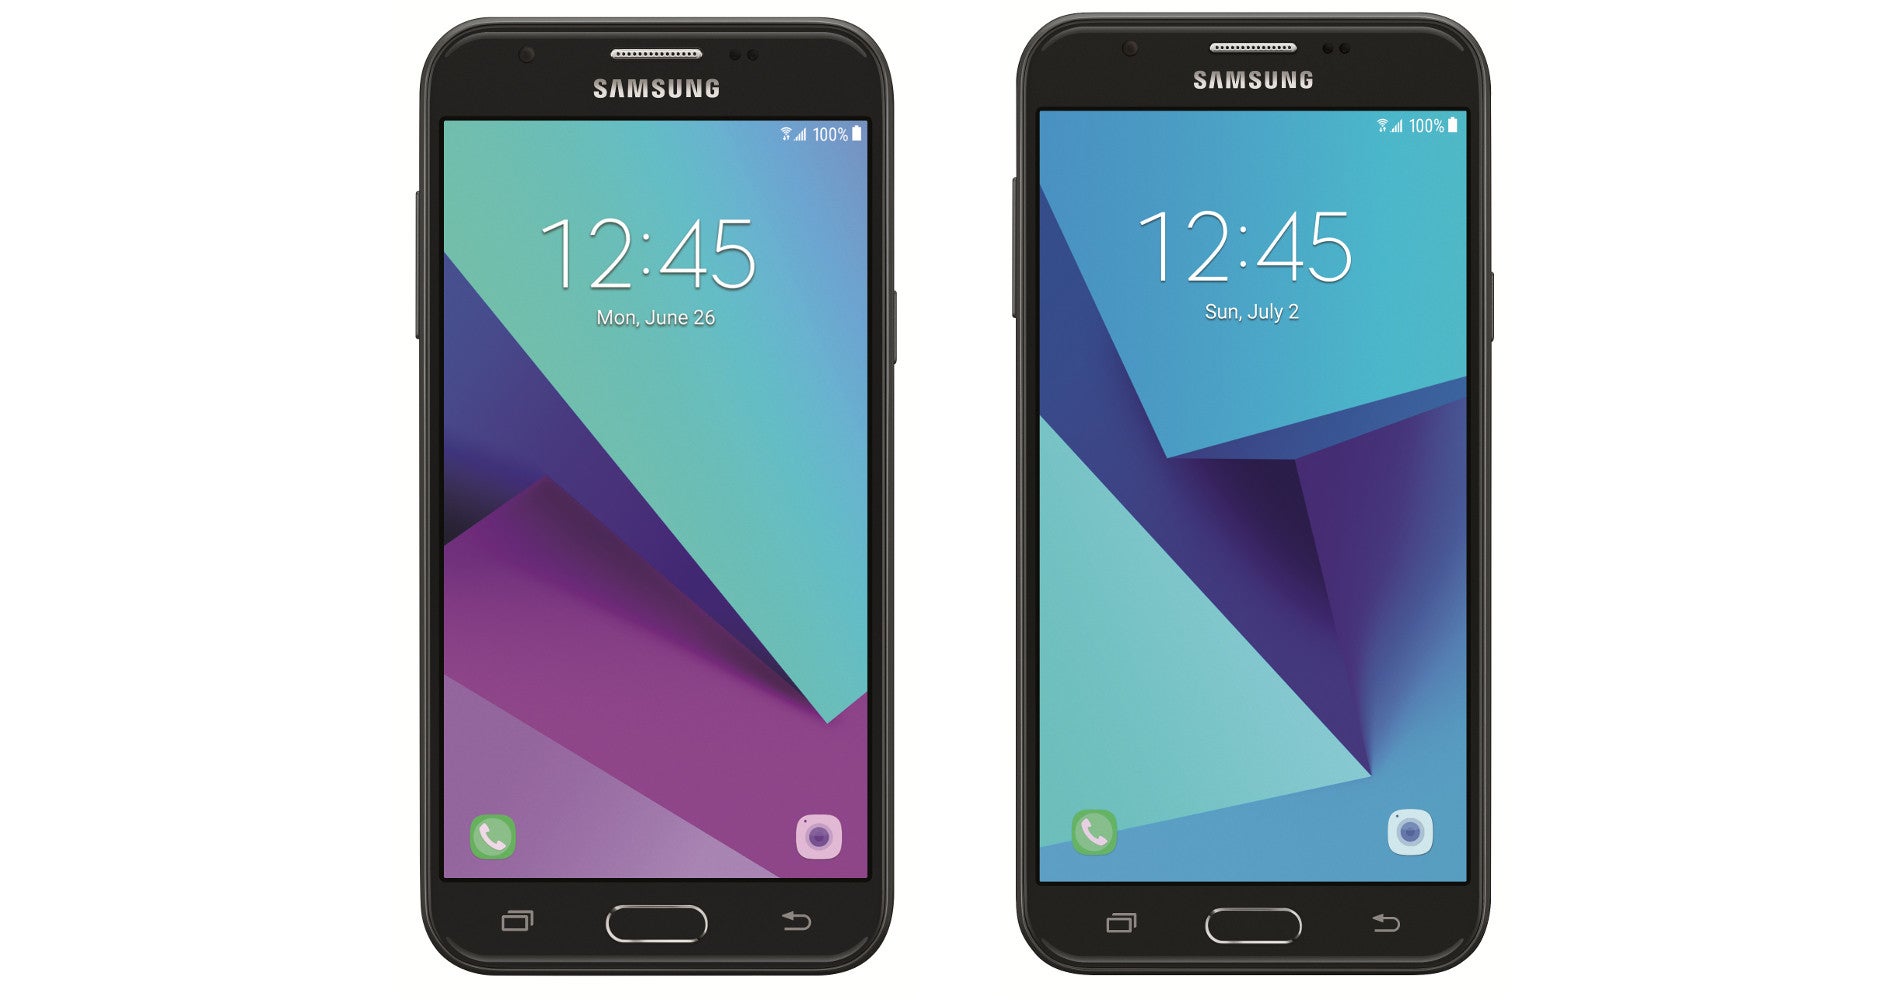 Samsung Galaxy J3 vs Samsung Galaxy J7 - Official: Samsung to launch unlocked Galaxy J3 and J7 in the US on July 28